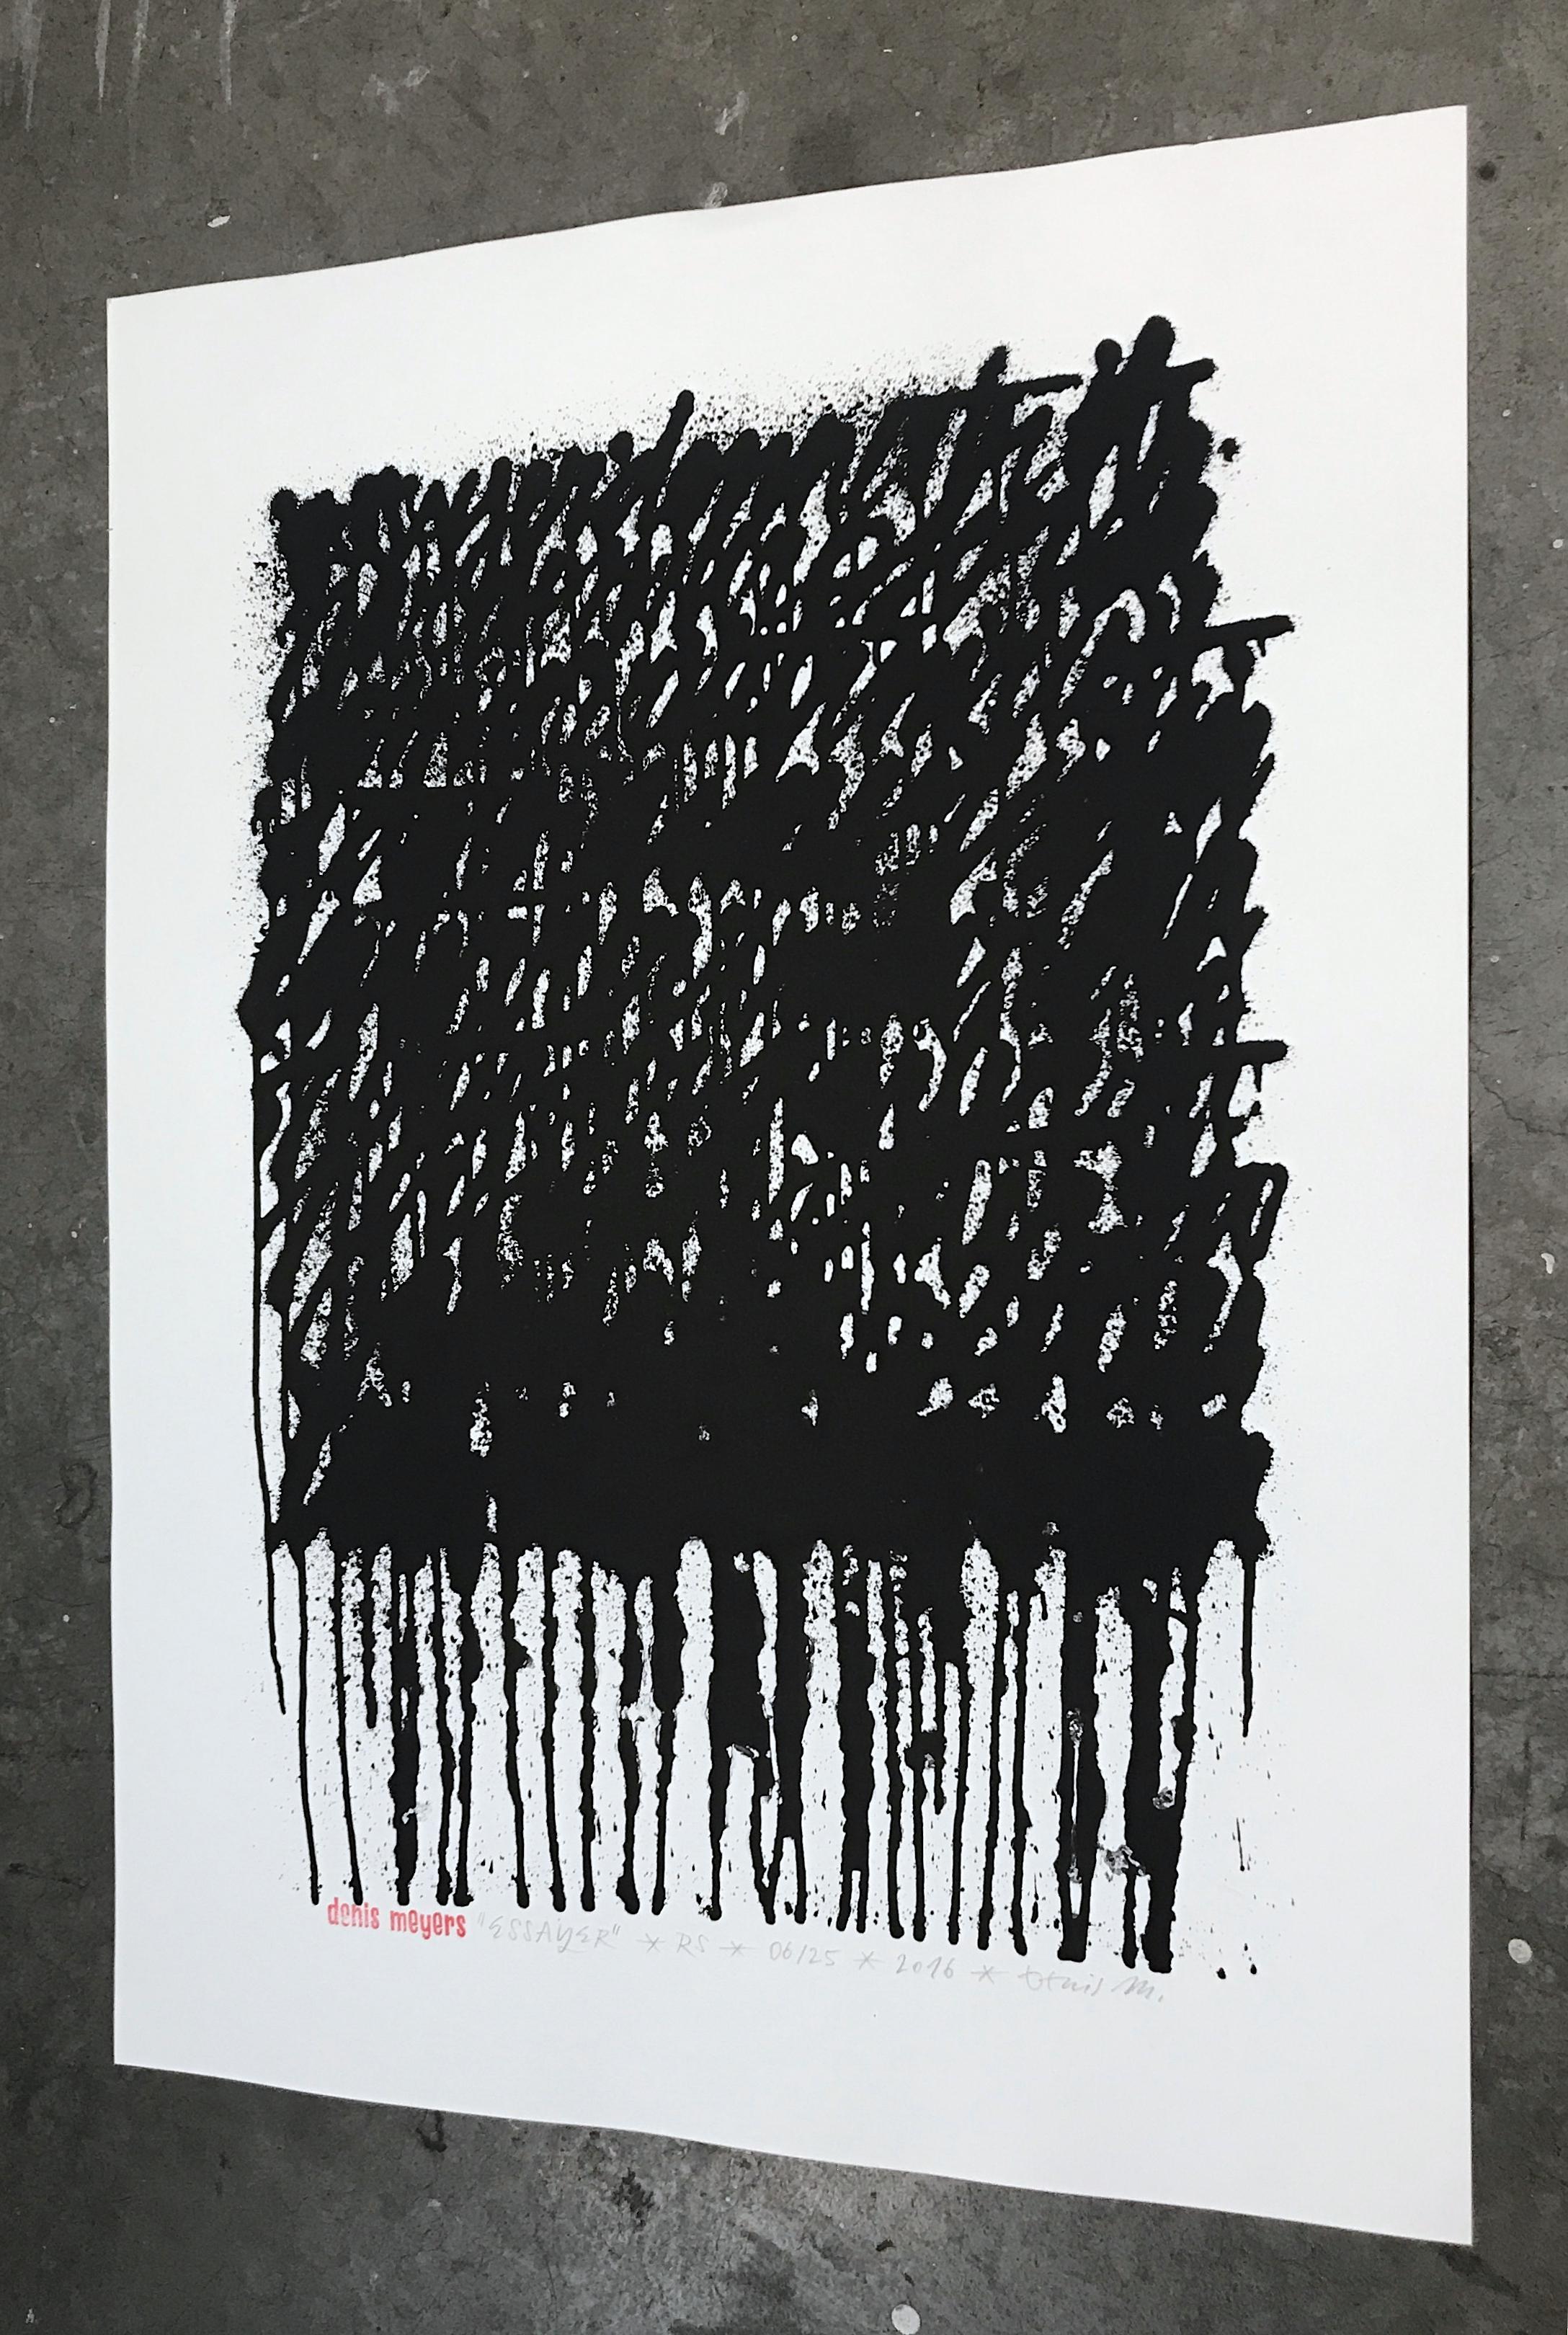 Unique print of an edition of 25. Whilst the series was printing, each print had a differing ink flow, producing a unique result for each edition.
Will ship Flat - Inquire for framing options.

Born in 1979, Denis Meyers is a Belgian urban artist.